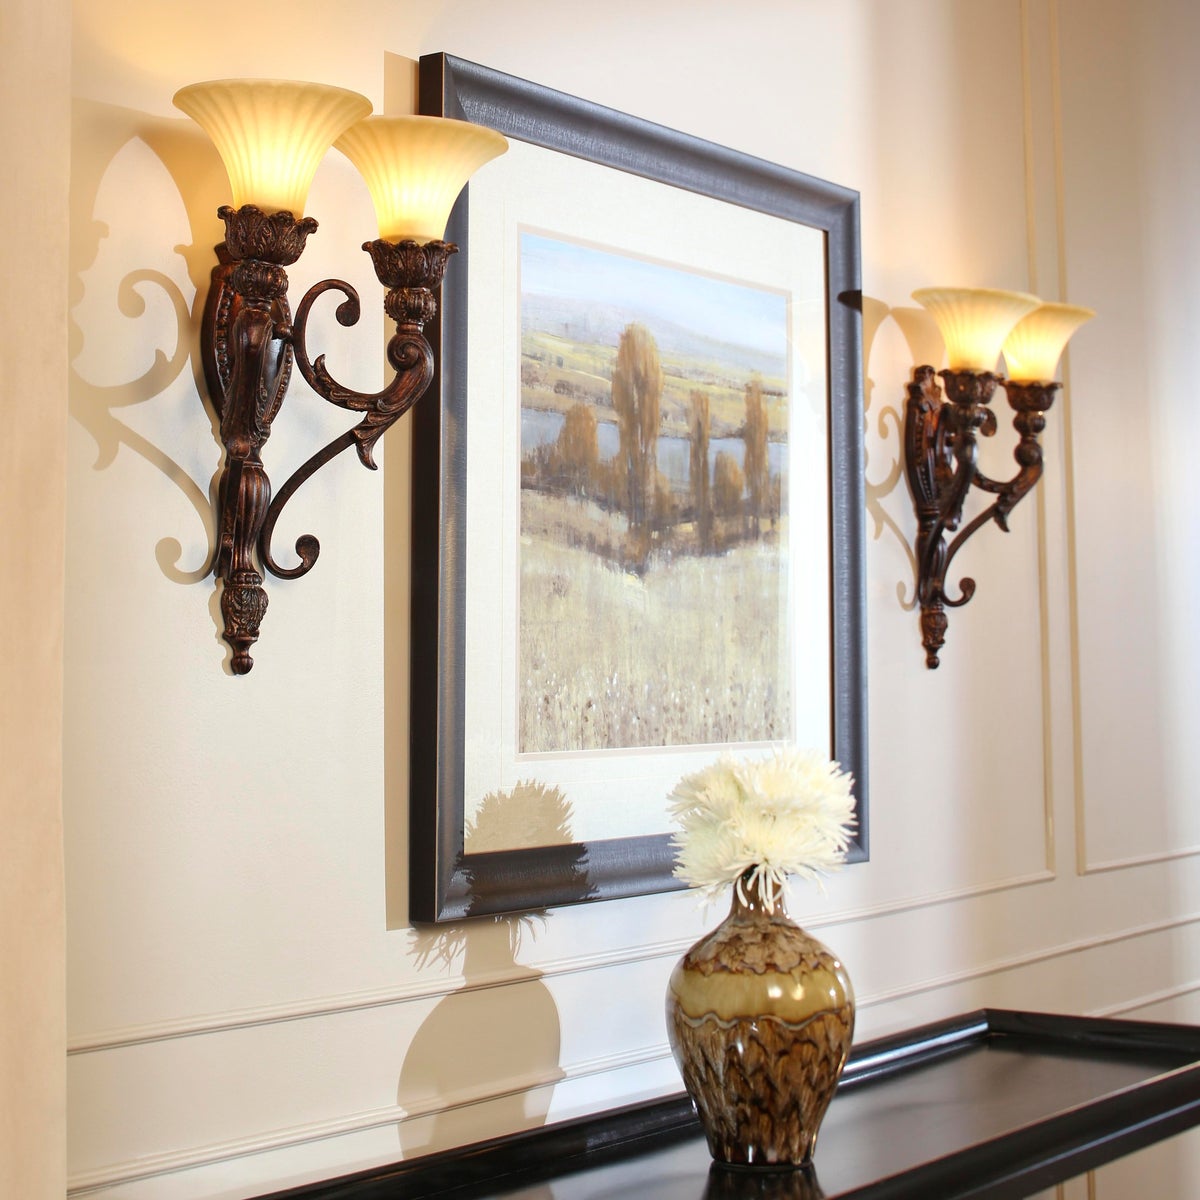 Traditional Wall Sconce with ornate detailing, corsican gold finish, and two bulbs. Classic lighting design for indoor spaces.